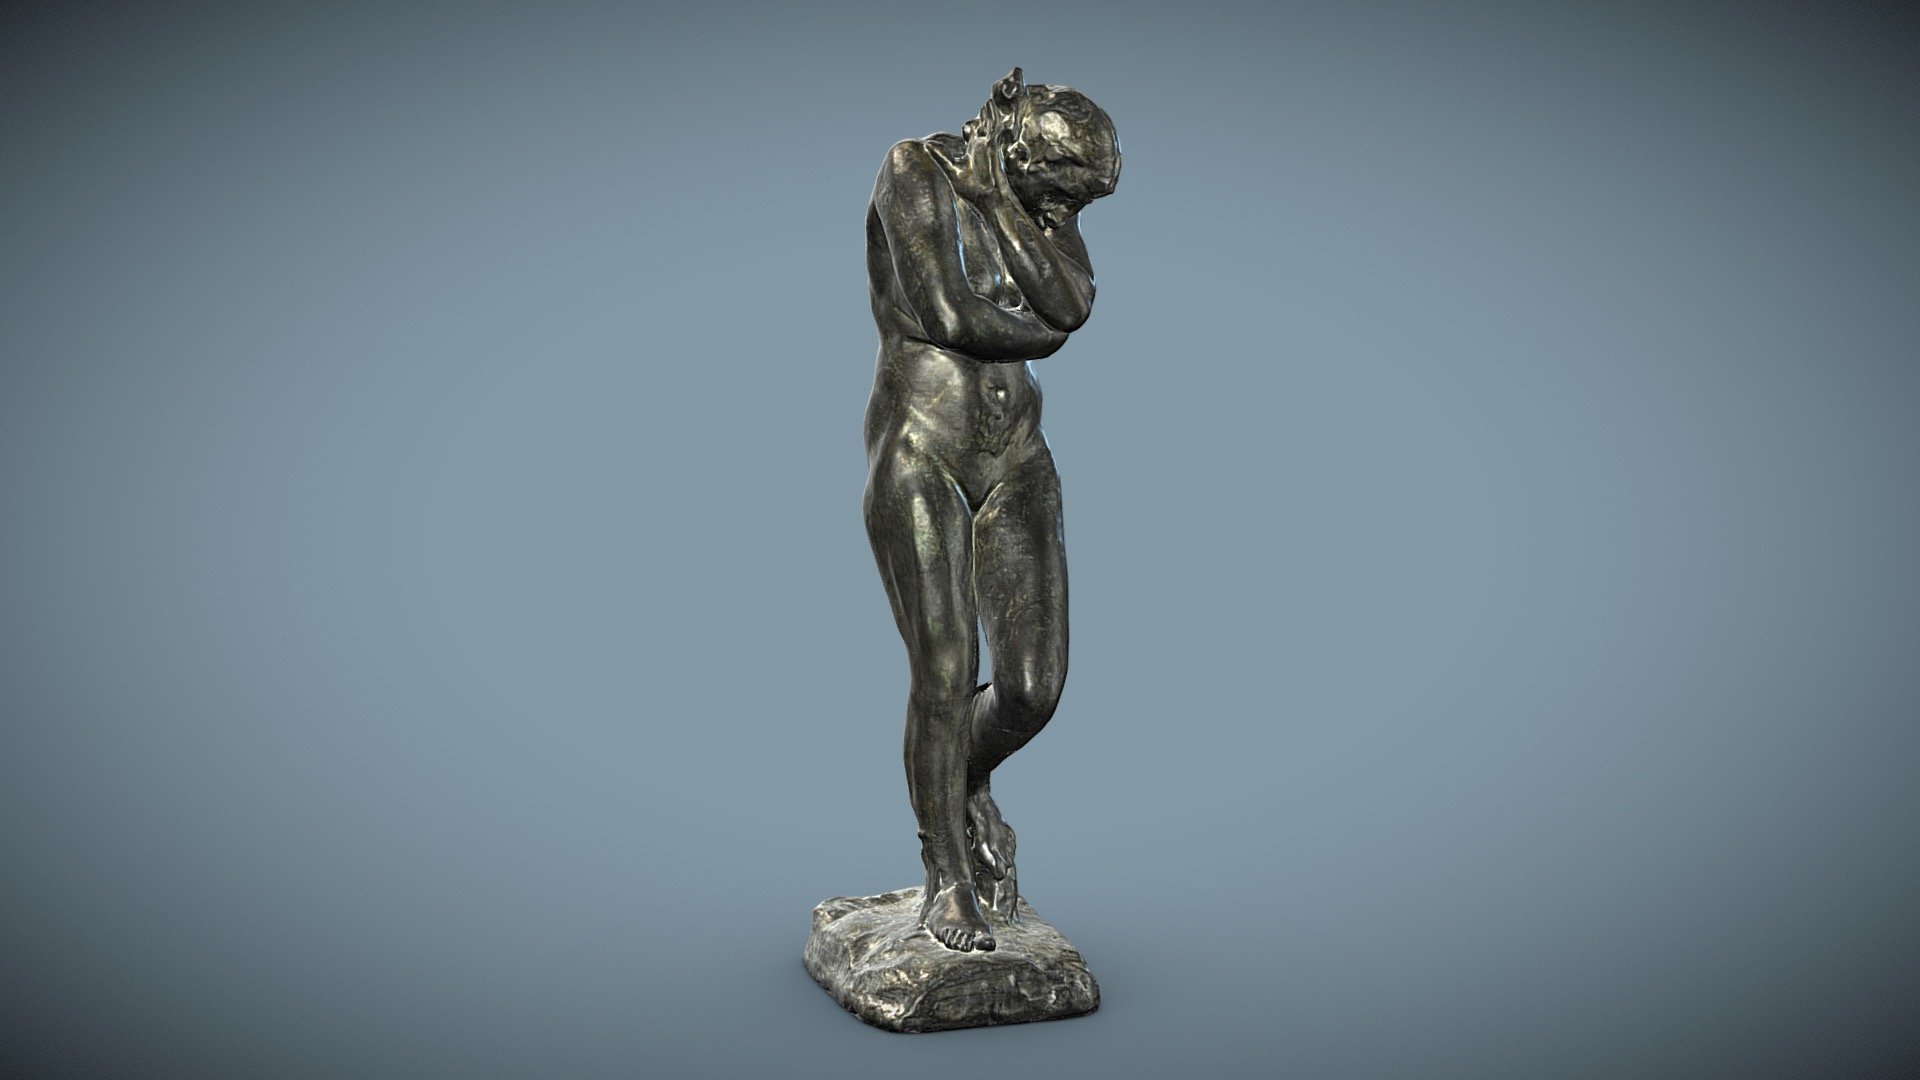 Plastic »Eve« by Auguste Rodin